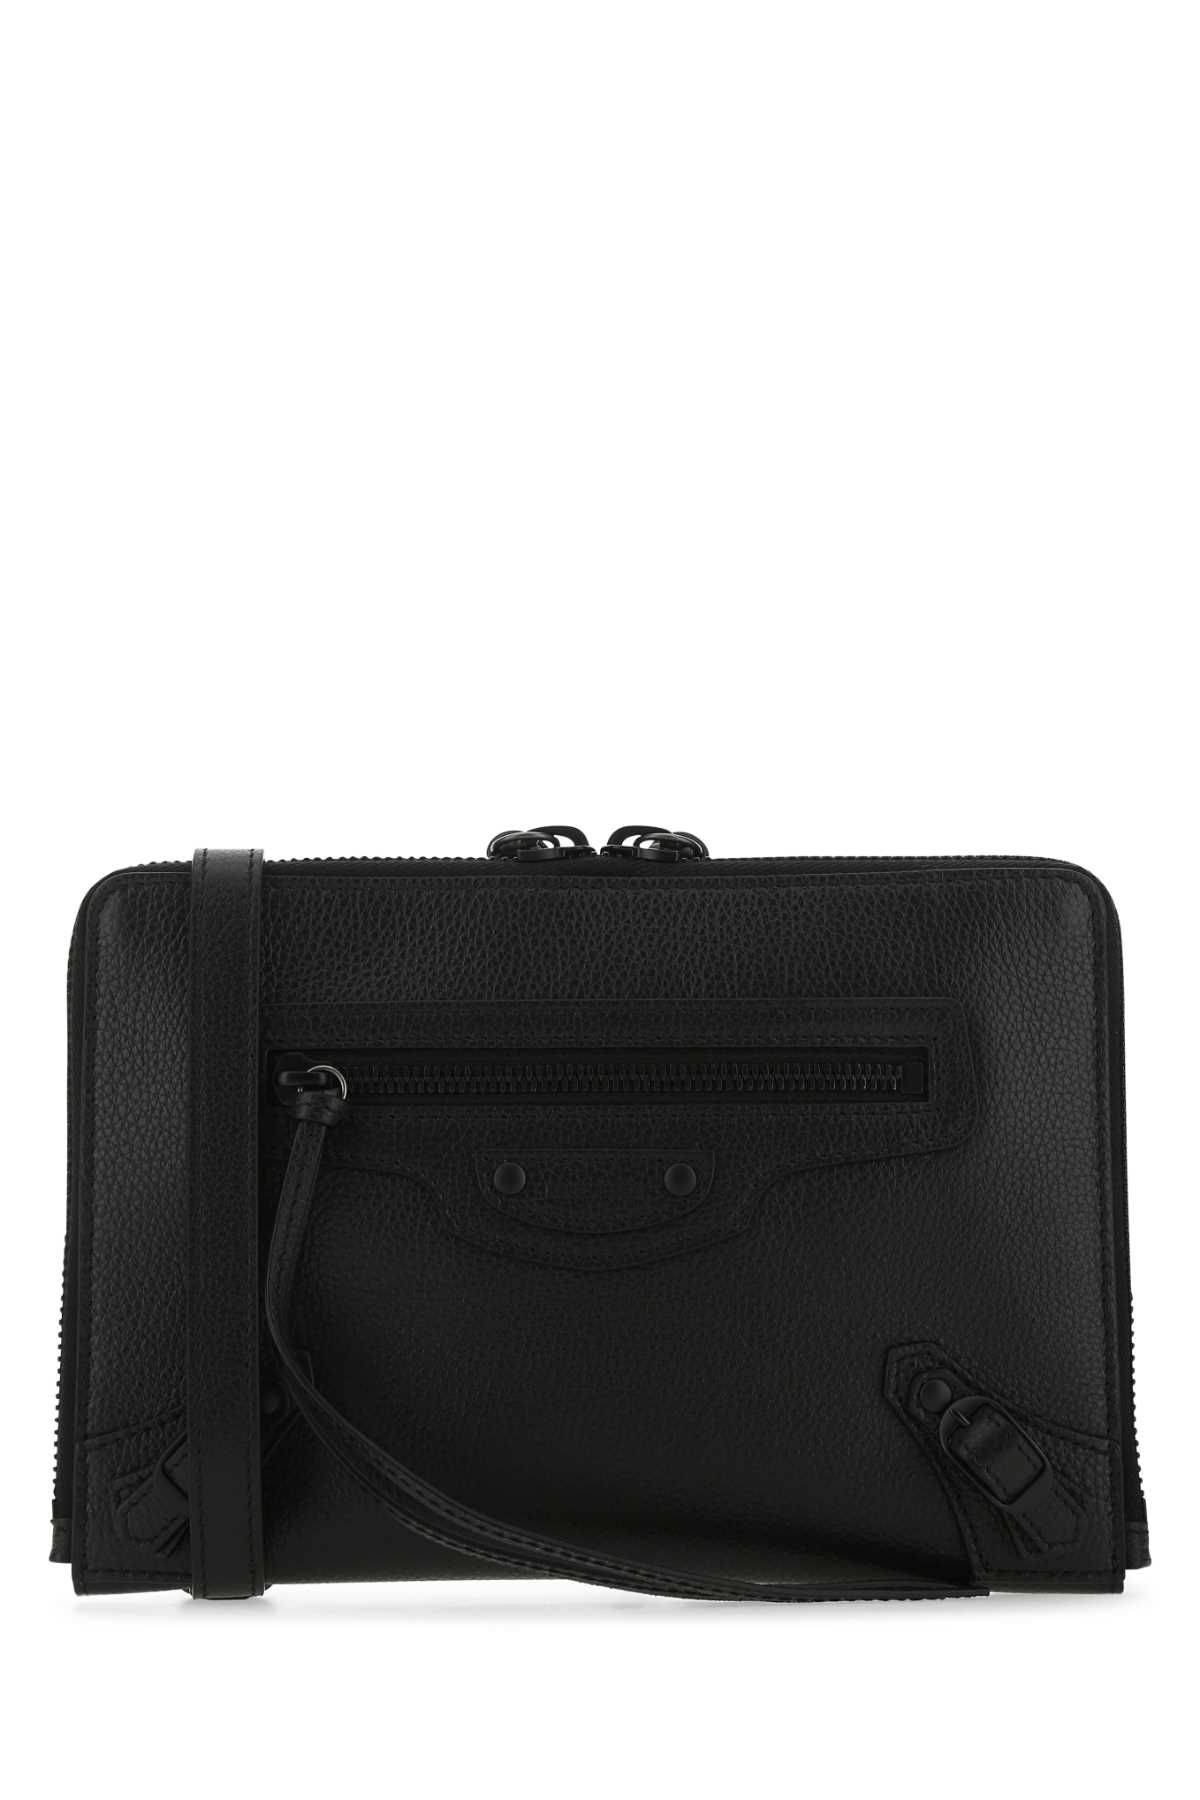 Black Leather Neo Classic S Pouch